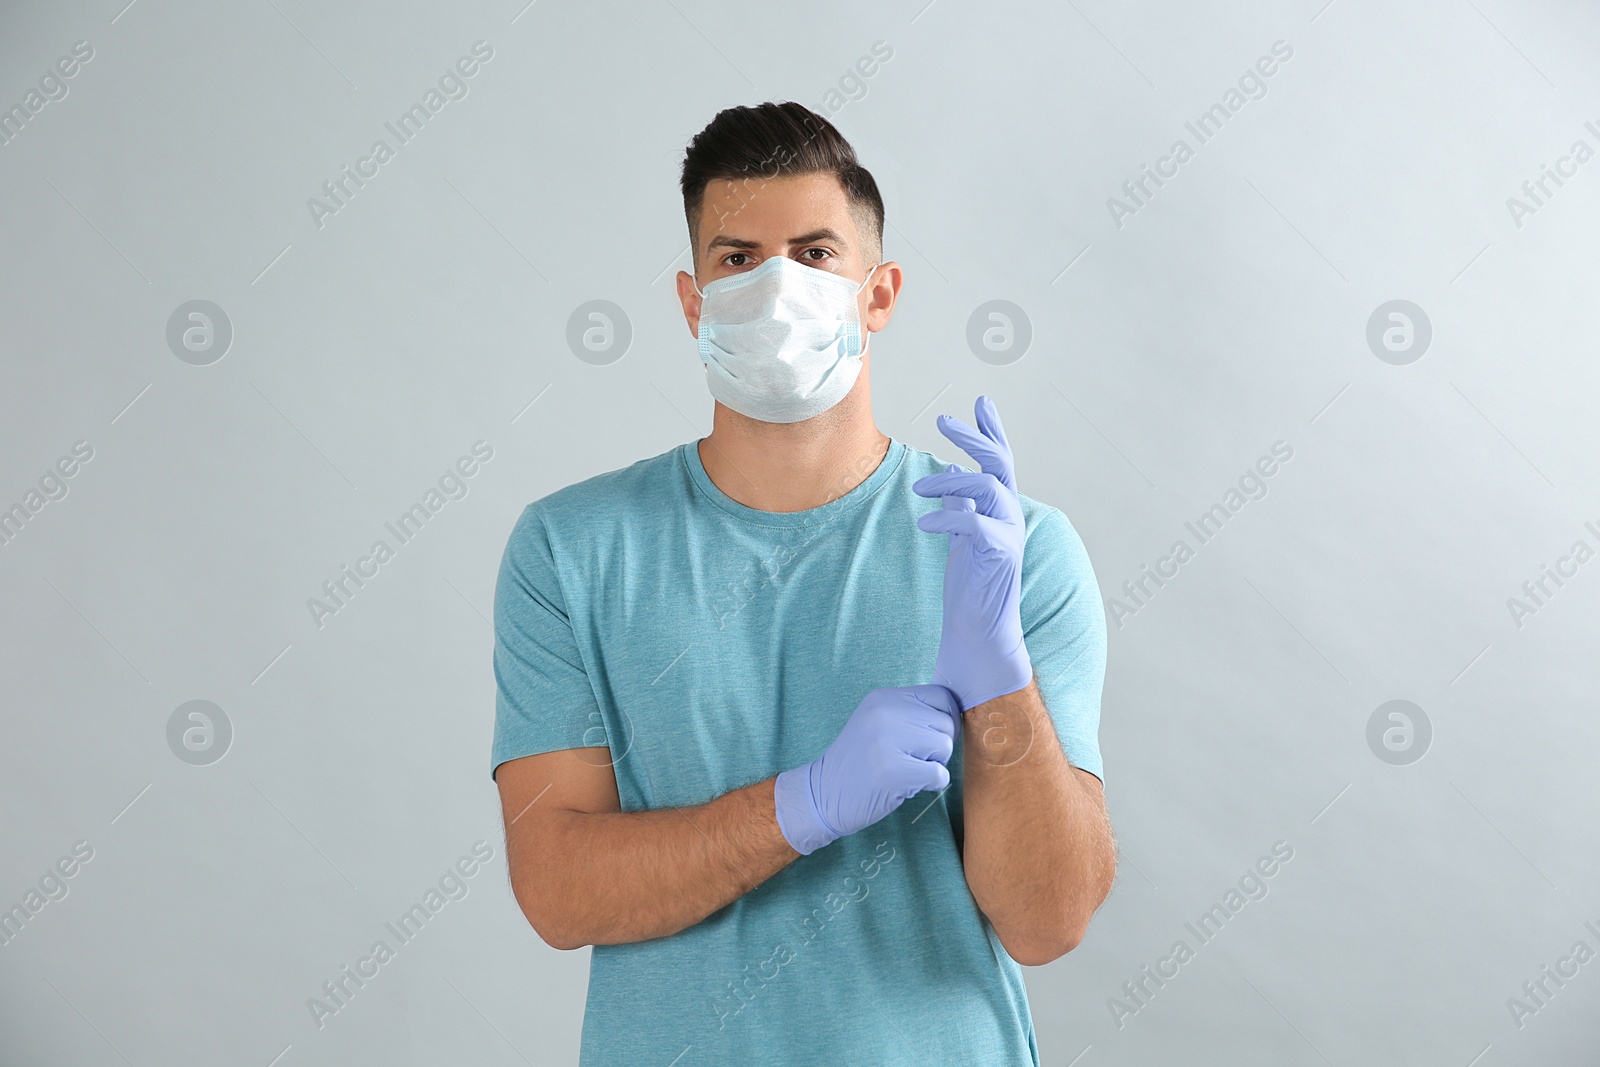 Photo of Man in protective face mask putting on medical gloves against grey background